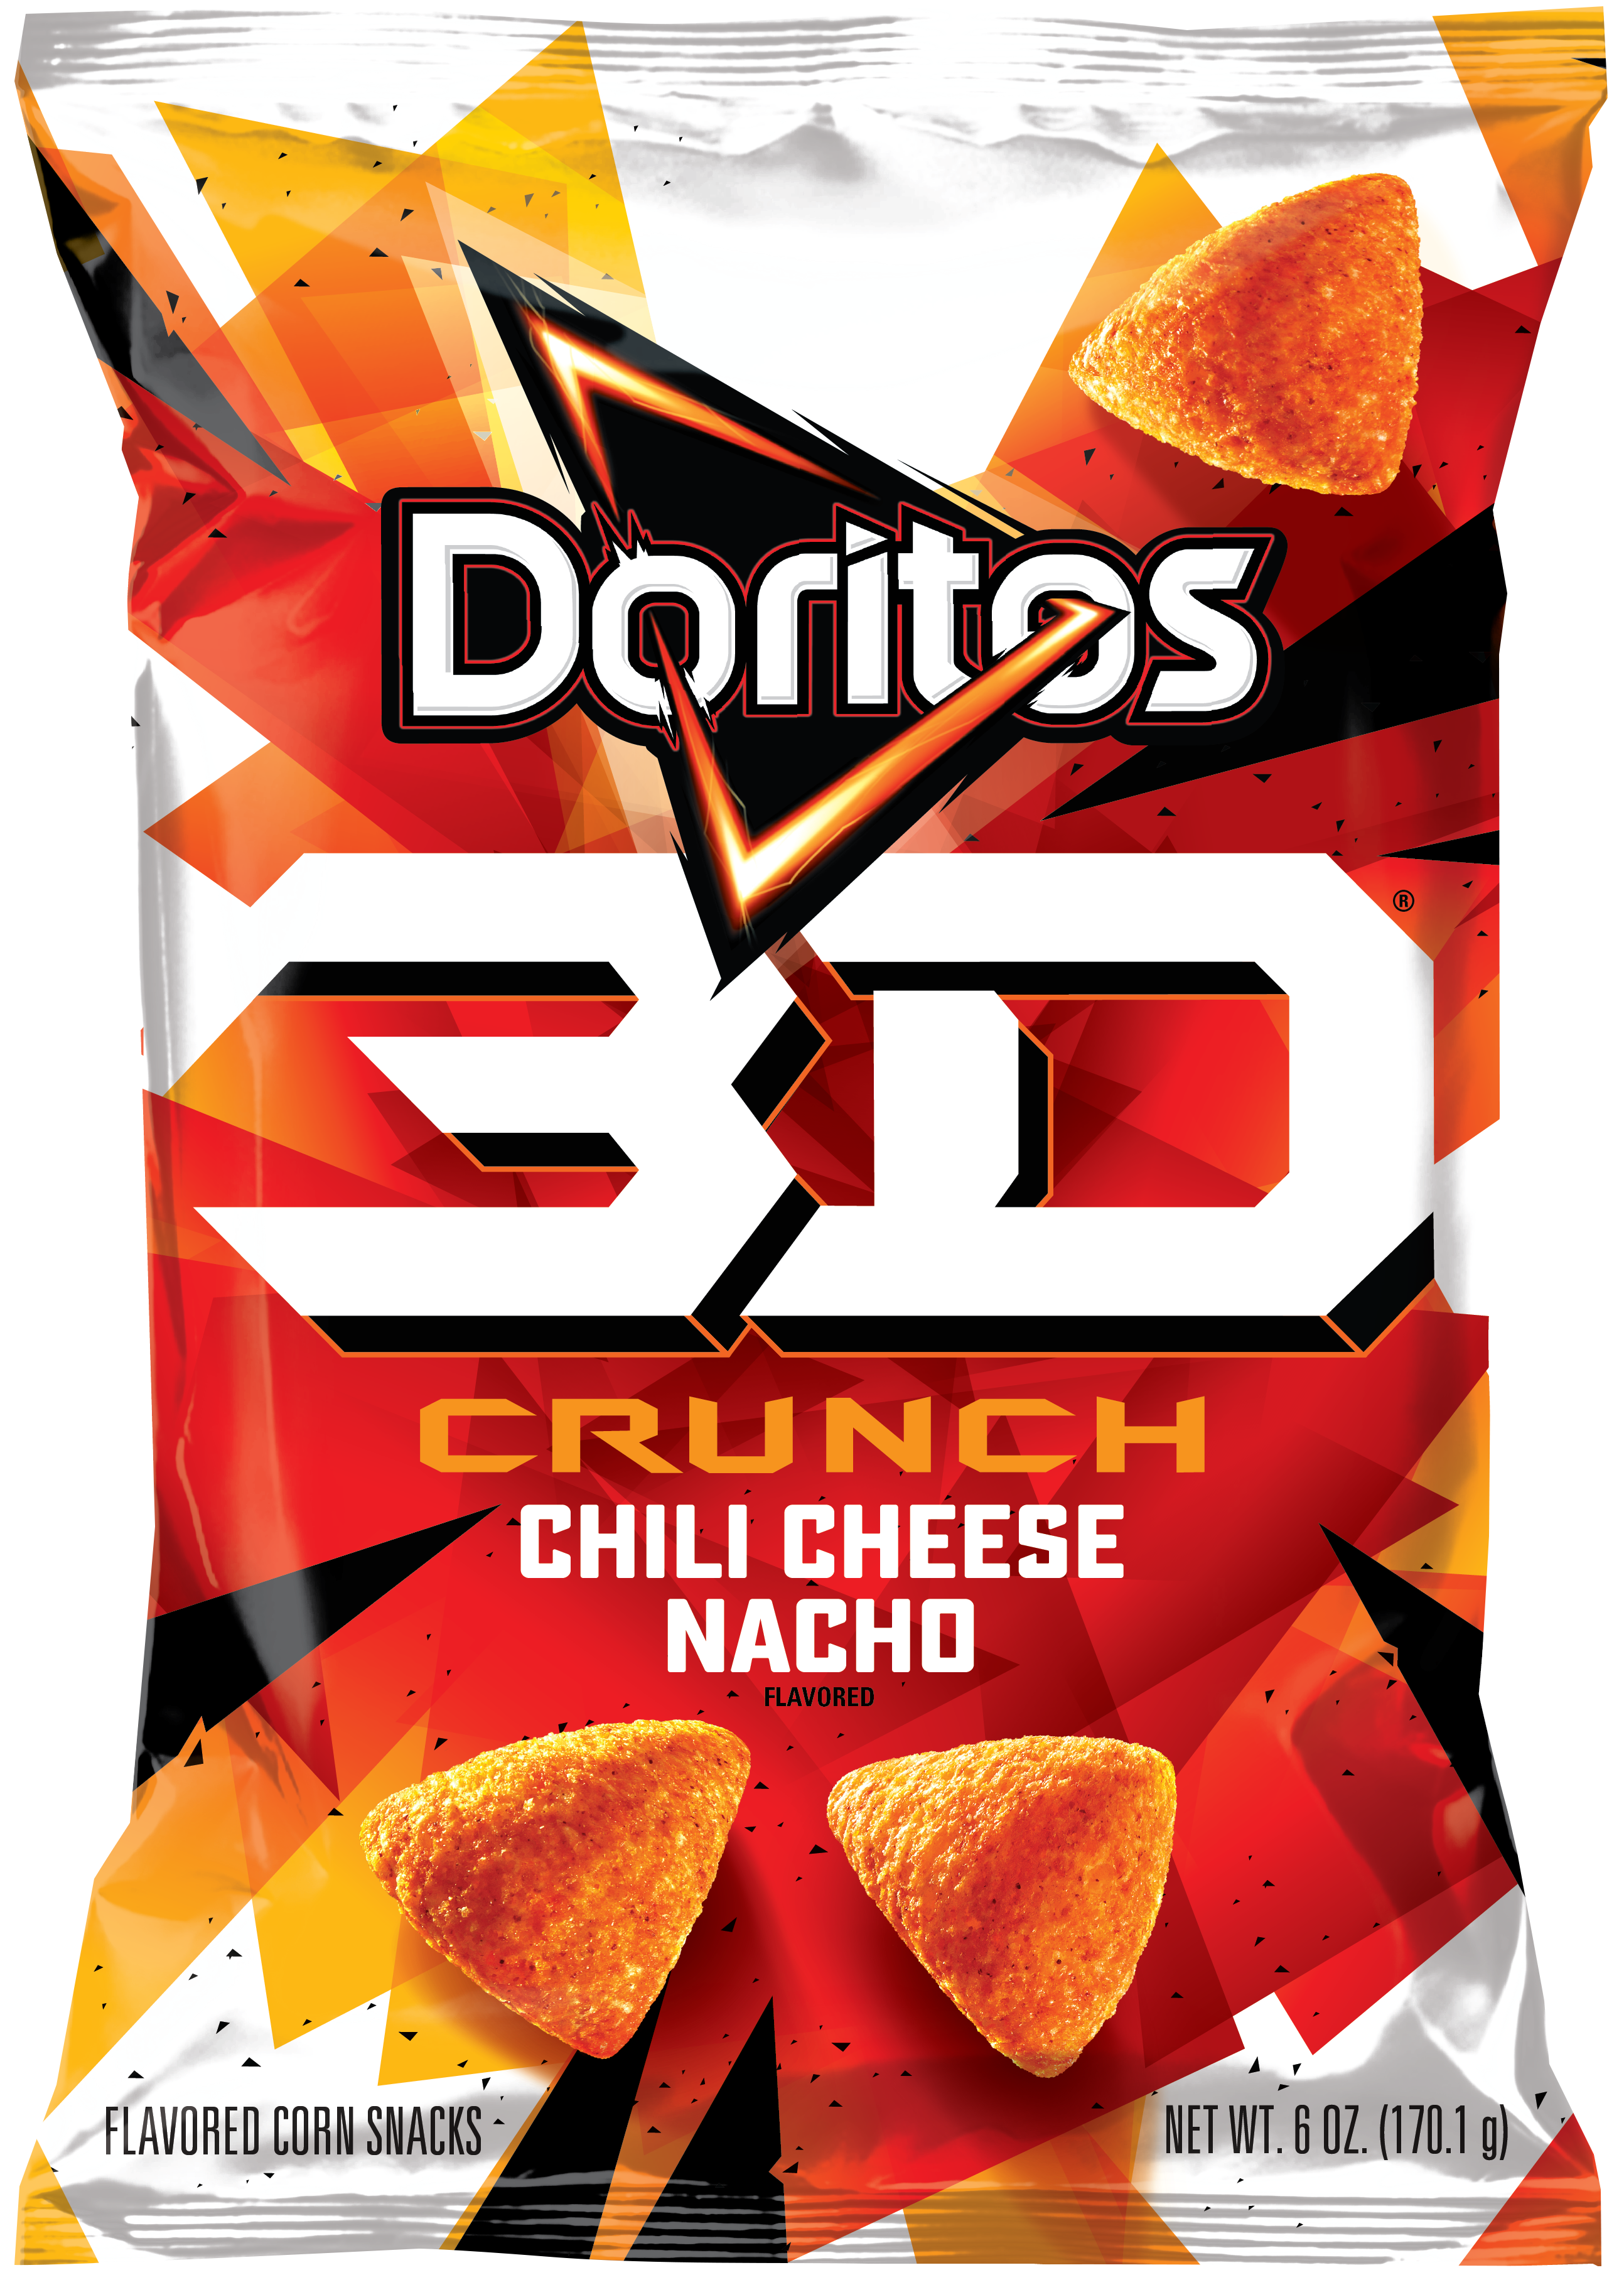 Doritos reveals new 3D Crunch will be available Dec. 28 in two flavors Spicy Ranch and Chili Cheese Nacho